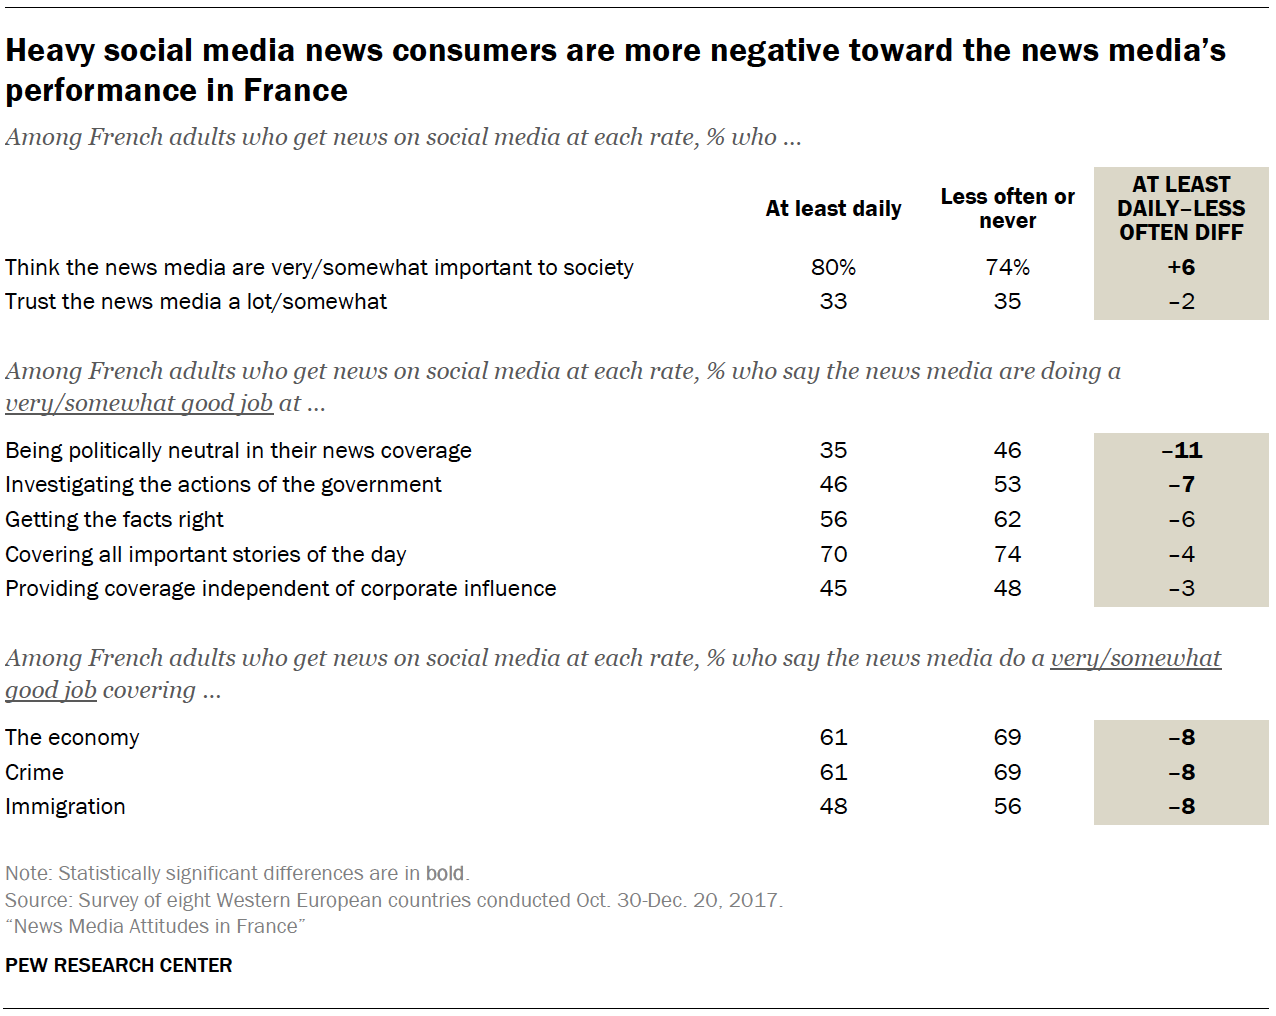 Heavy social media news consumers are more negative toward the news media's performance in France